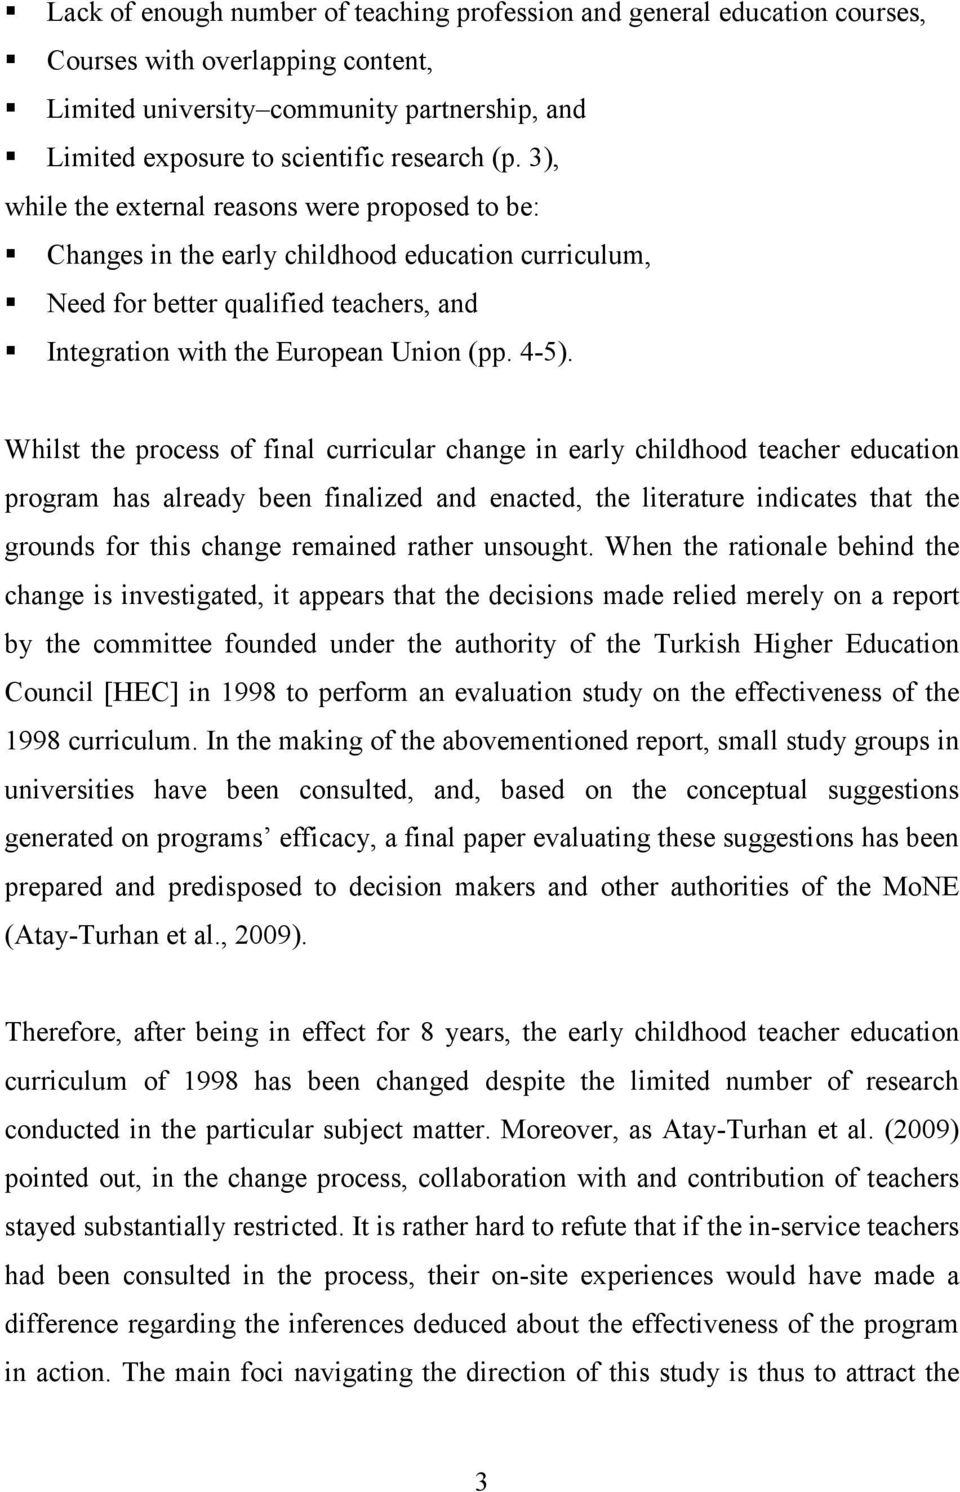 Whilst the process of final curricular change in early childhood teacher education program has already been finalized and enacted, the literature indicates that the grounds for this change remained